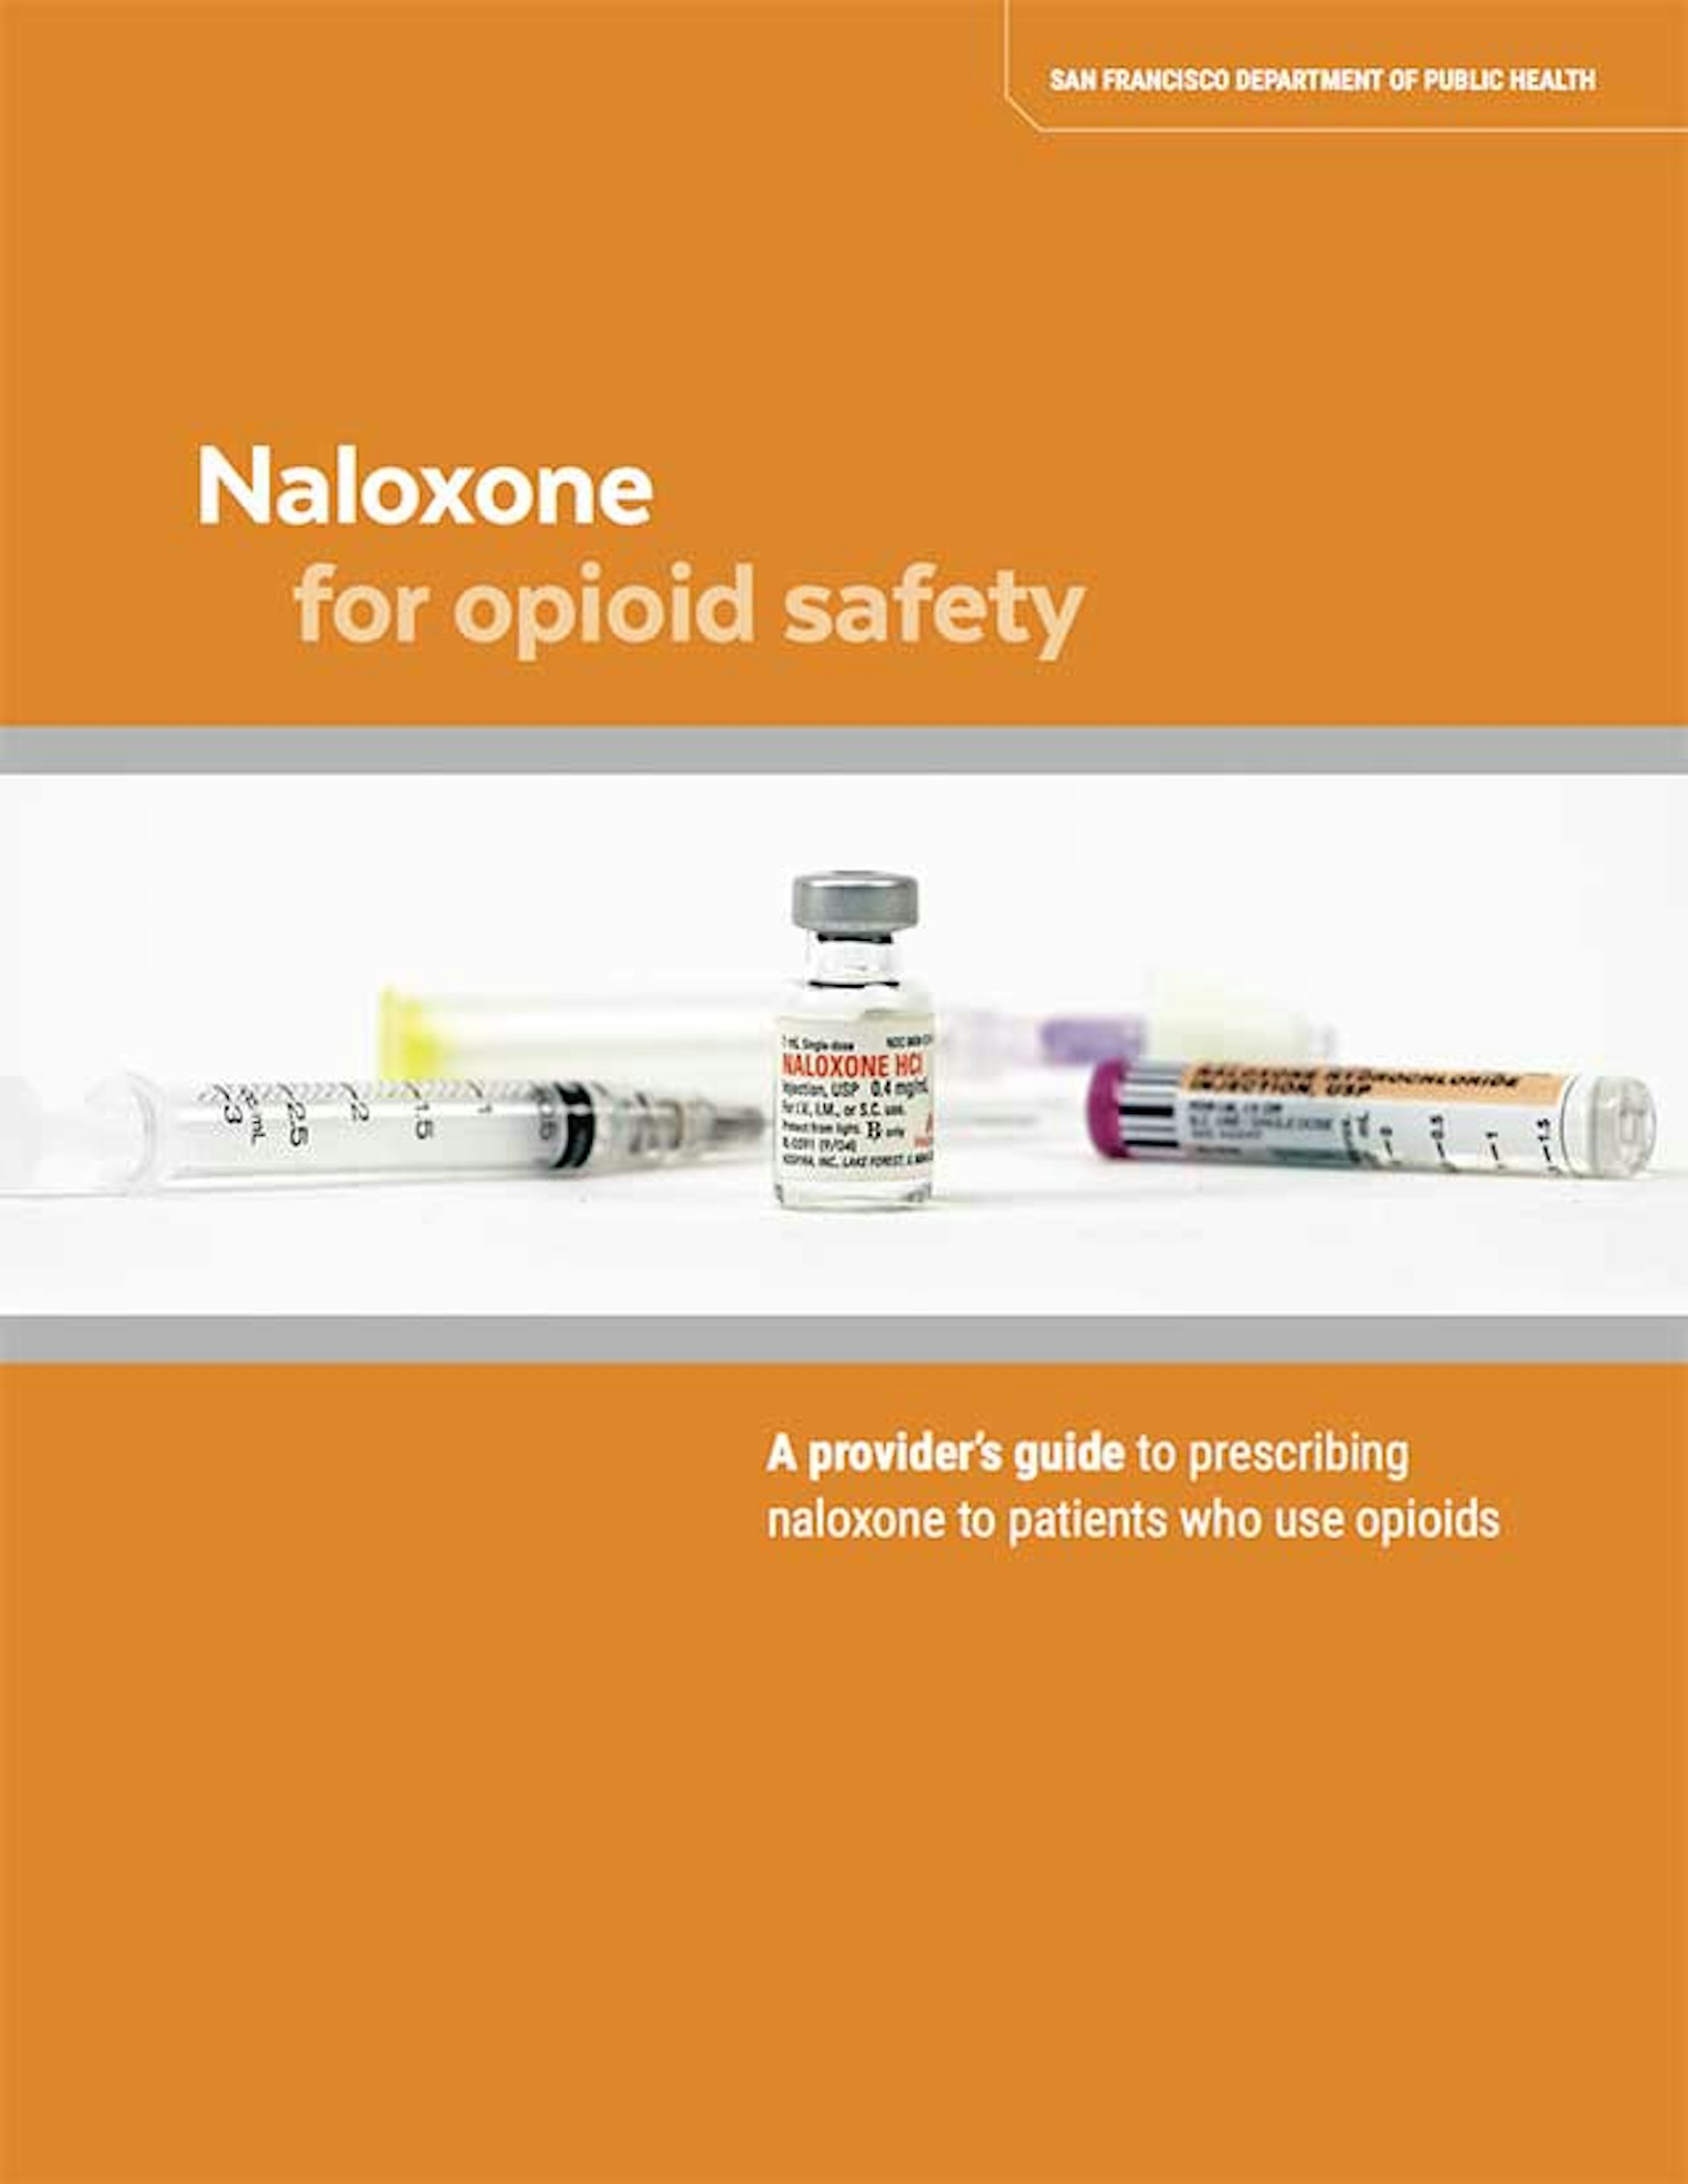 A Provider’s Guide to Prescribing Narcan to Patients Who Use Opioids